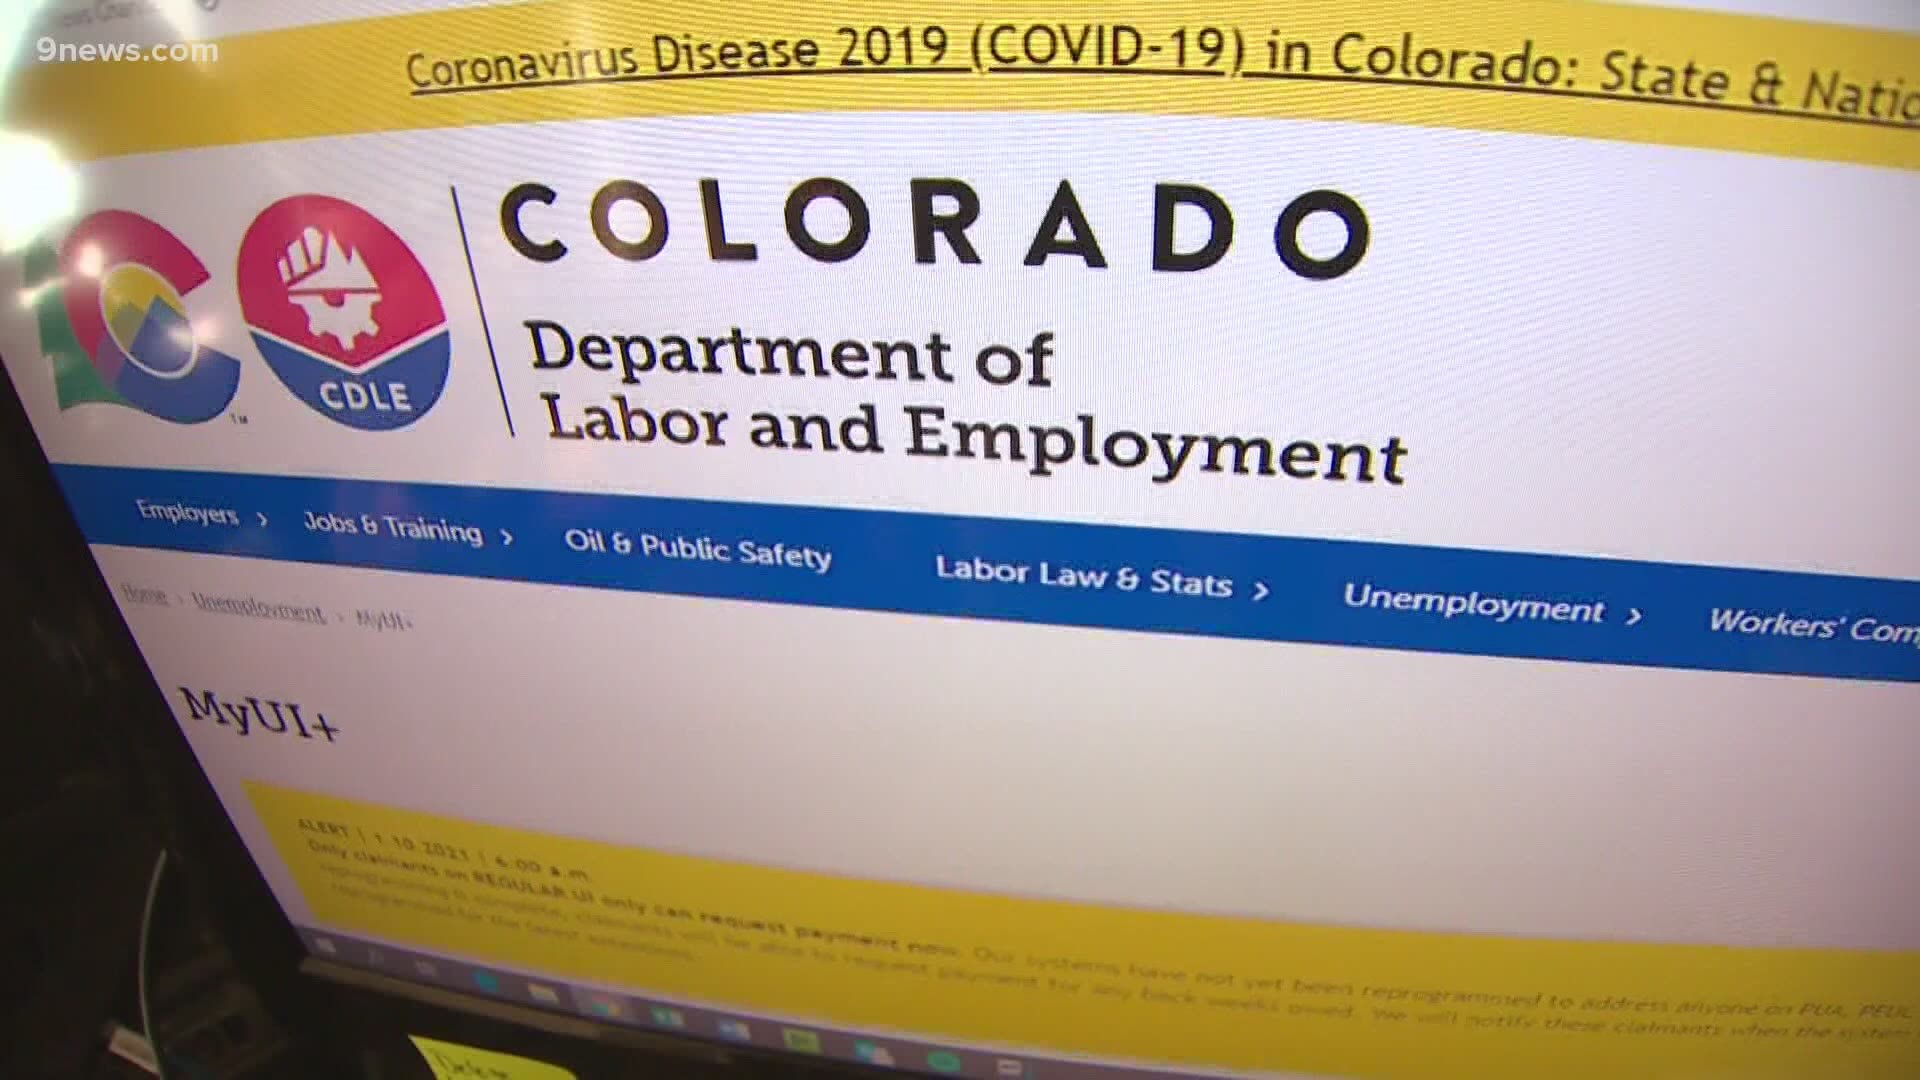 In an effort to streamline the unemployment benefits process, Colorado has made several technology upgrades.